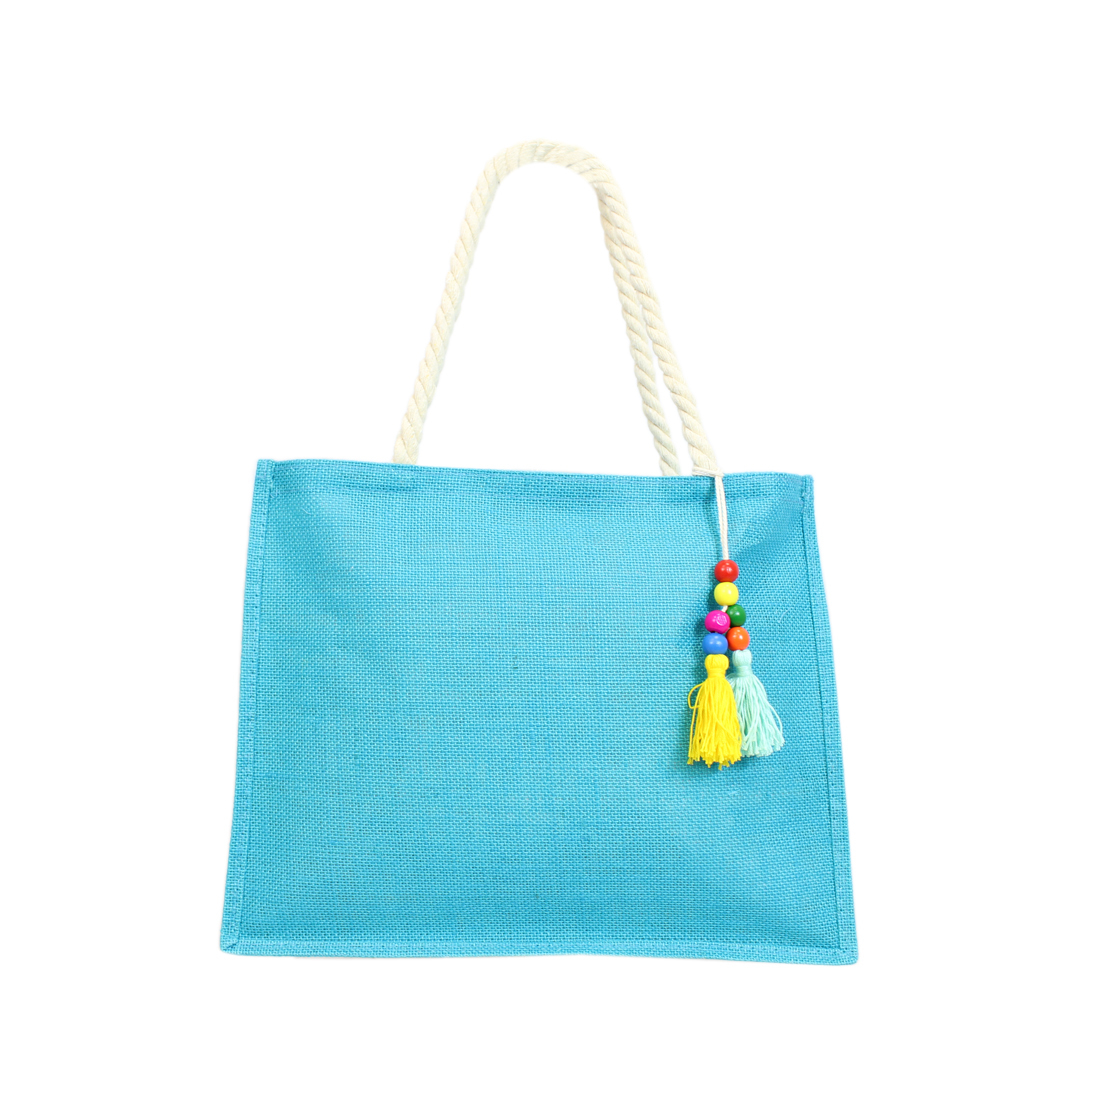 Rectangular with two straw straps and colorful hanging decoration